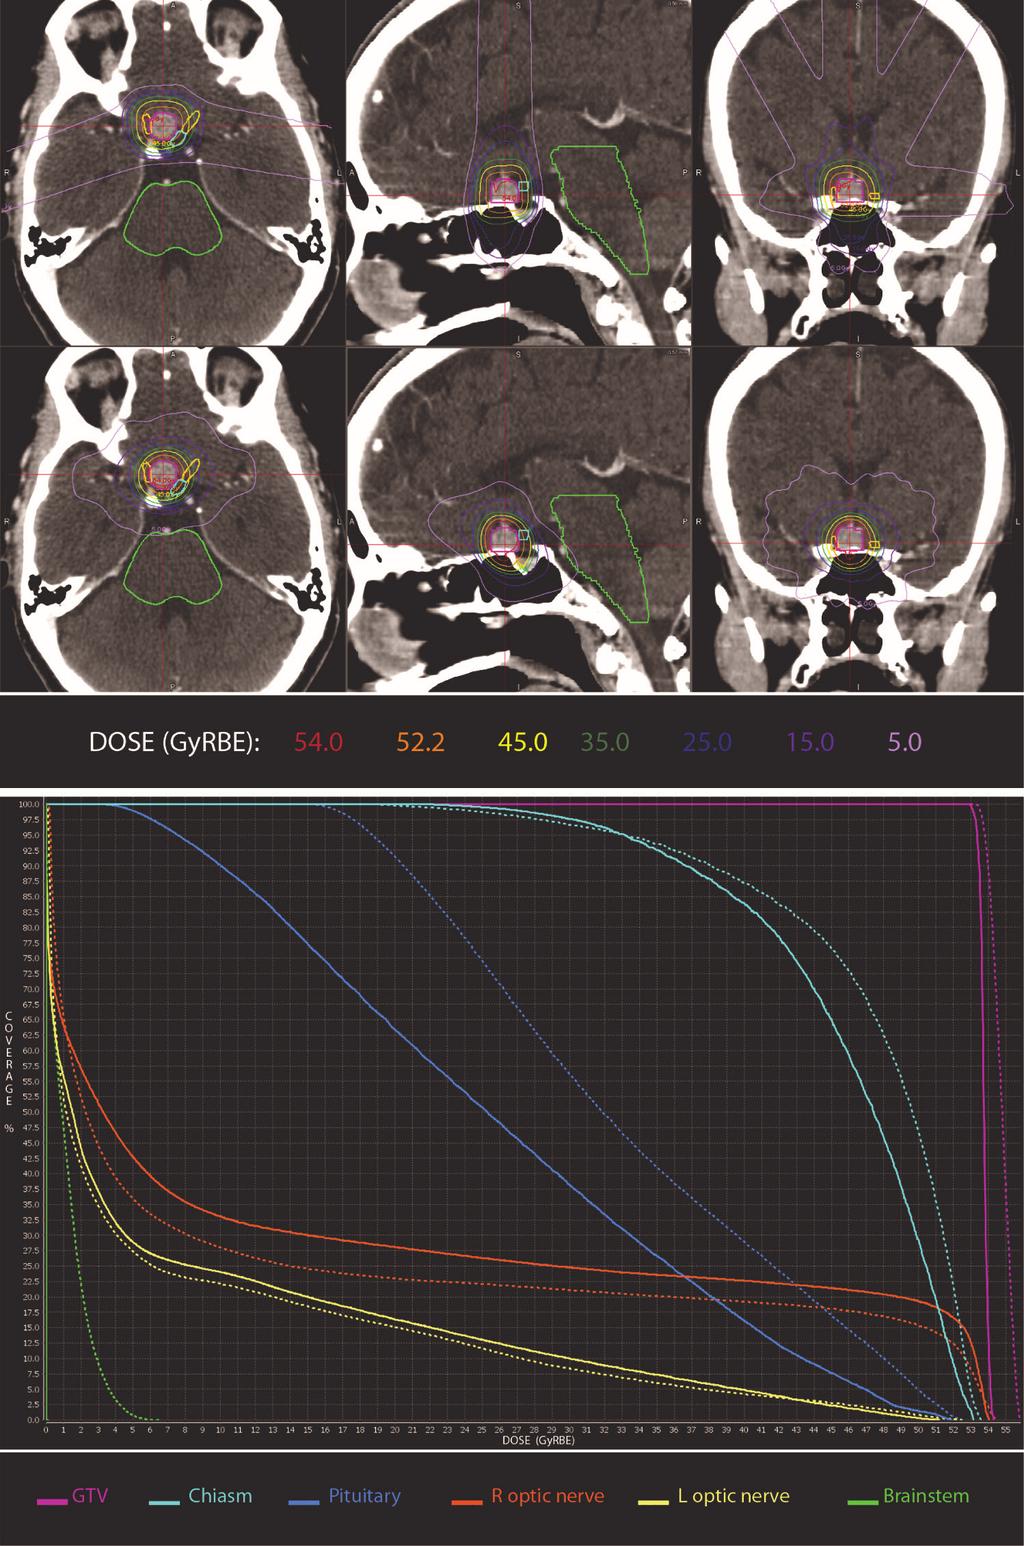 Page 6 of 11 Hwang et al. The role of radiotherapy in the management of high-grade meningiomas Figure 2 Radiation plans for right anterior base of skull atypical meningioma receiving 52.